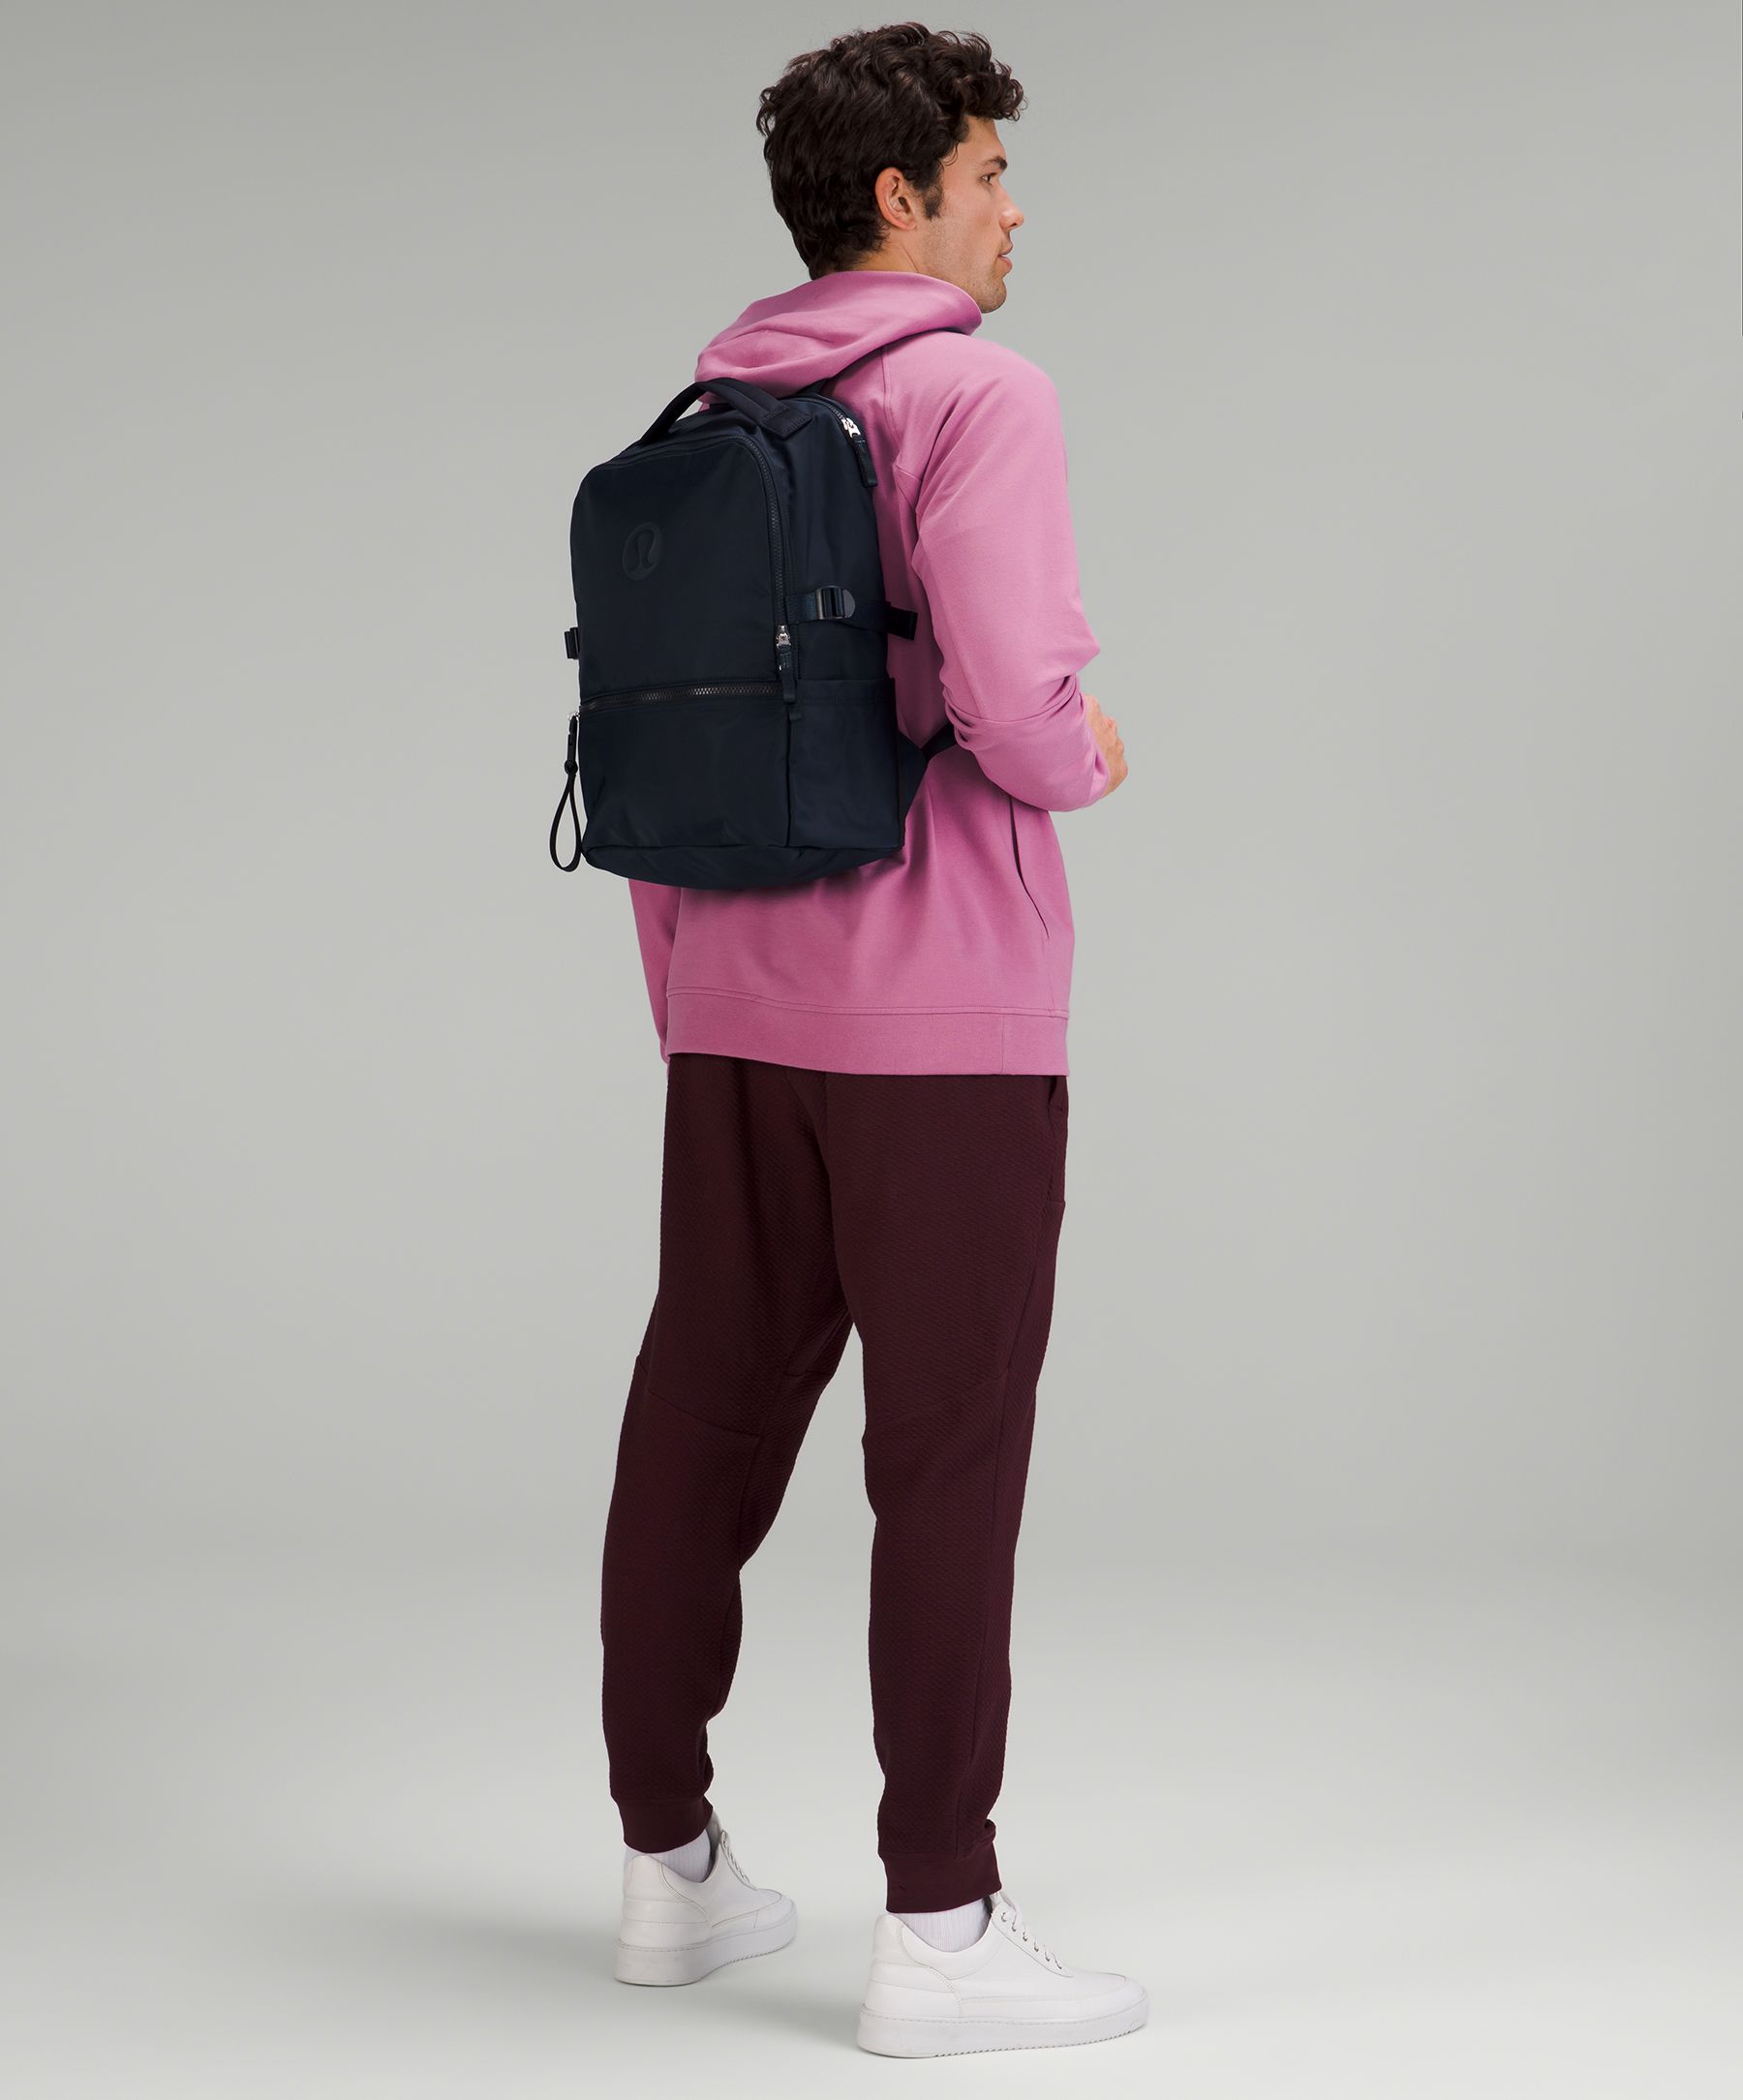 Shop Lululemon Backpack With Laptop Compartment - New Crew 22l Logo